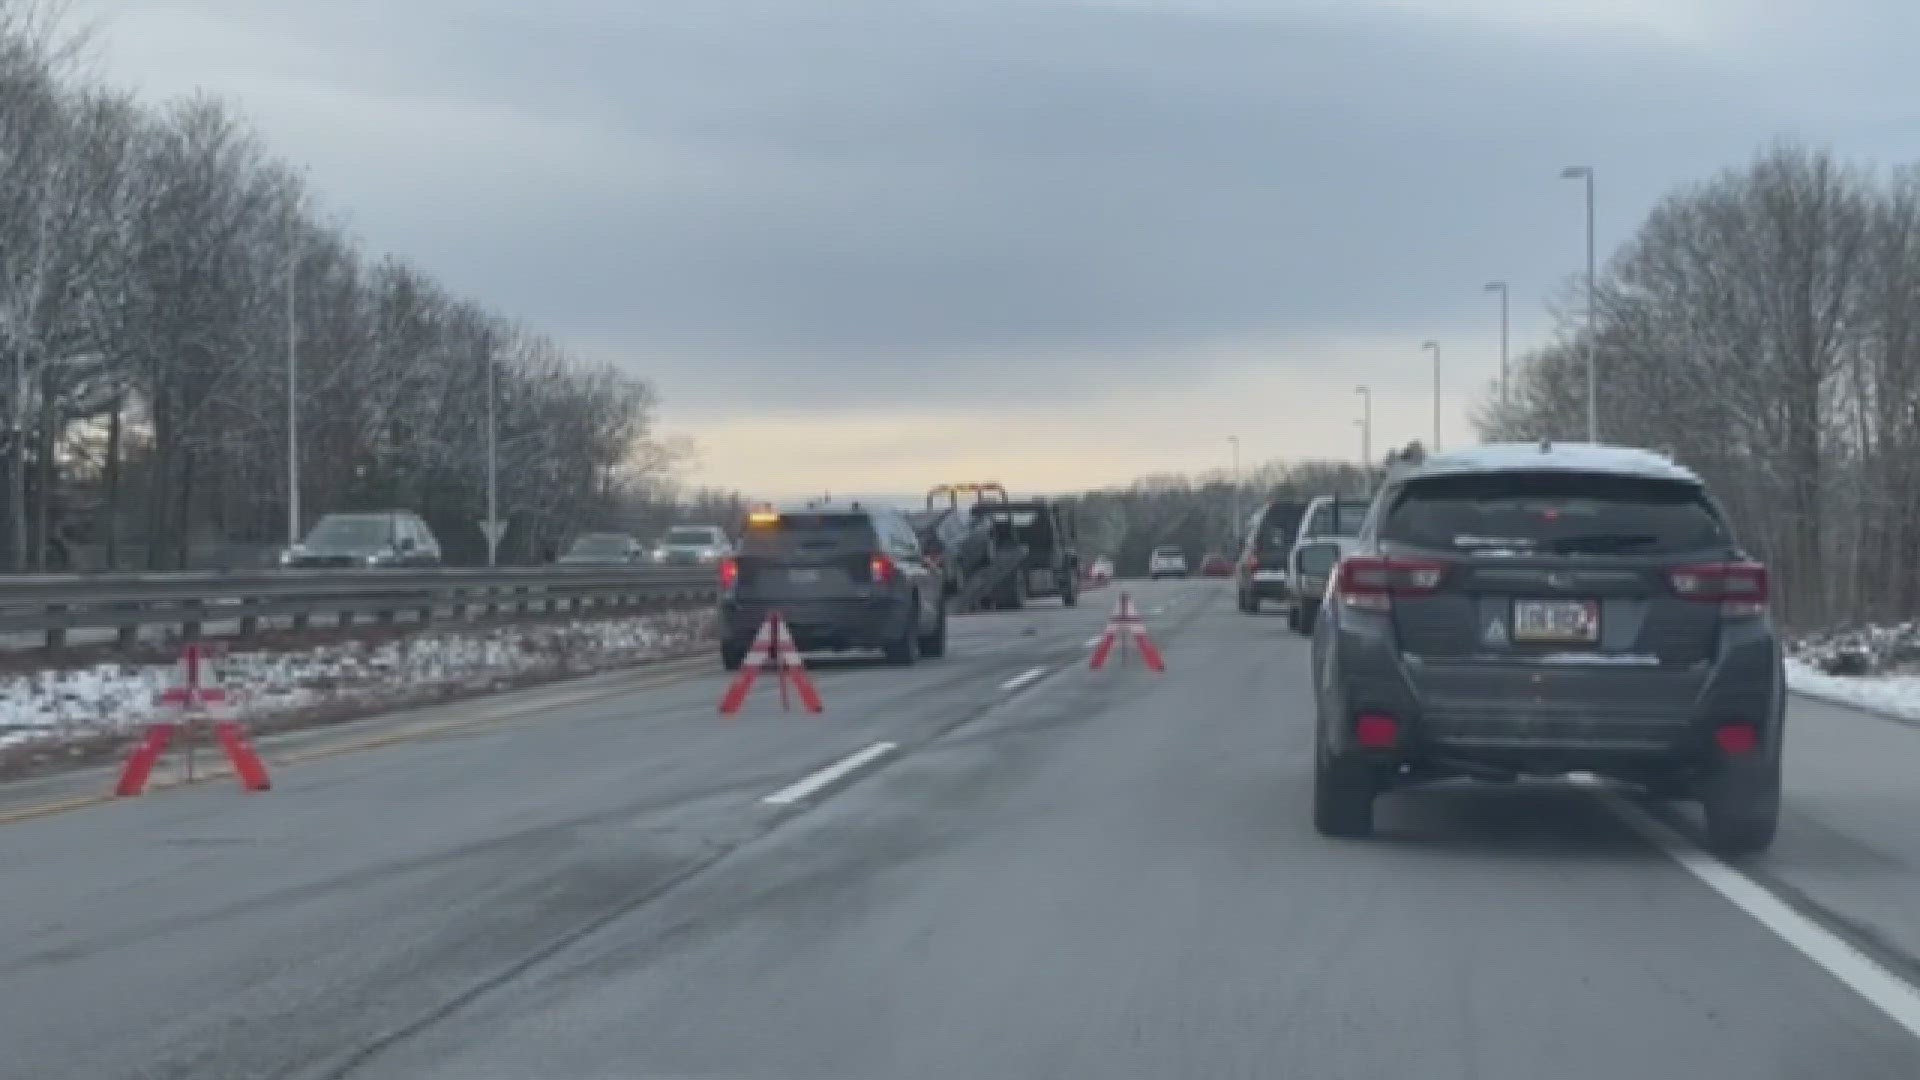 The southbound lanes of I-295 in Freeport were backed up Wednesday morning as officials respond to a crash.